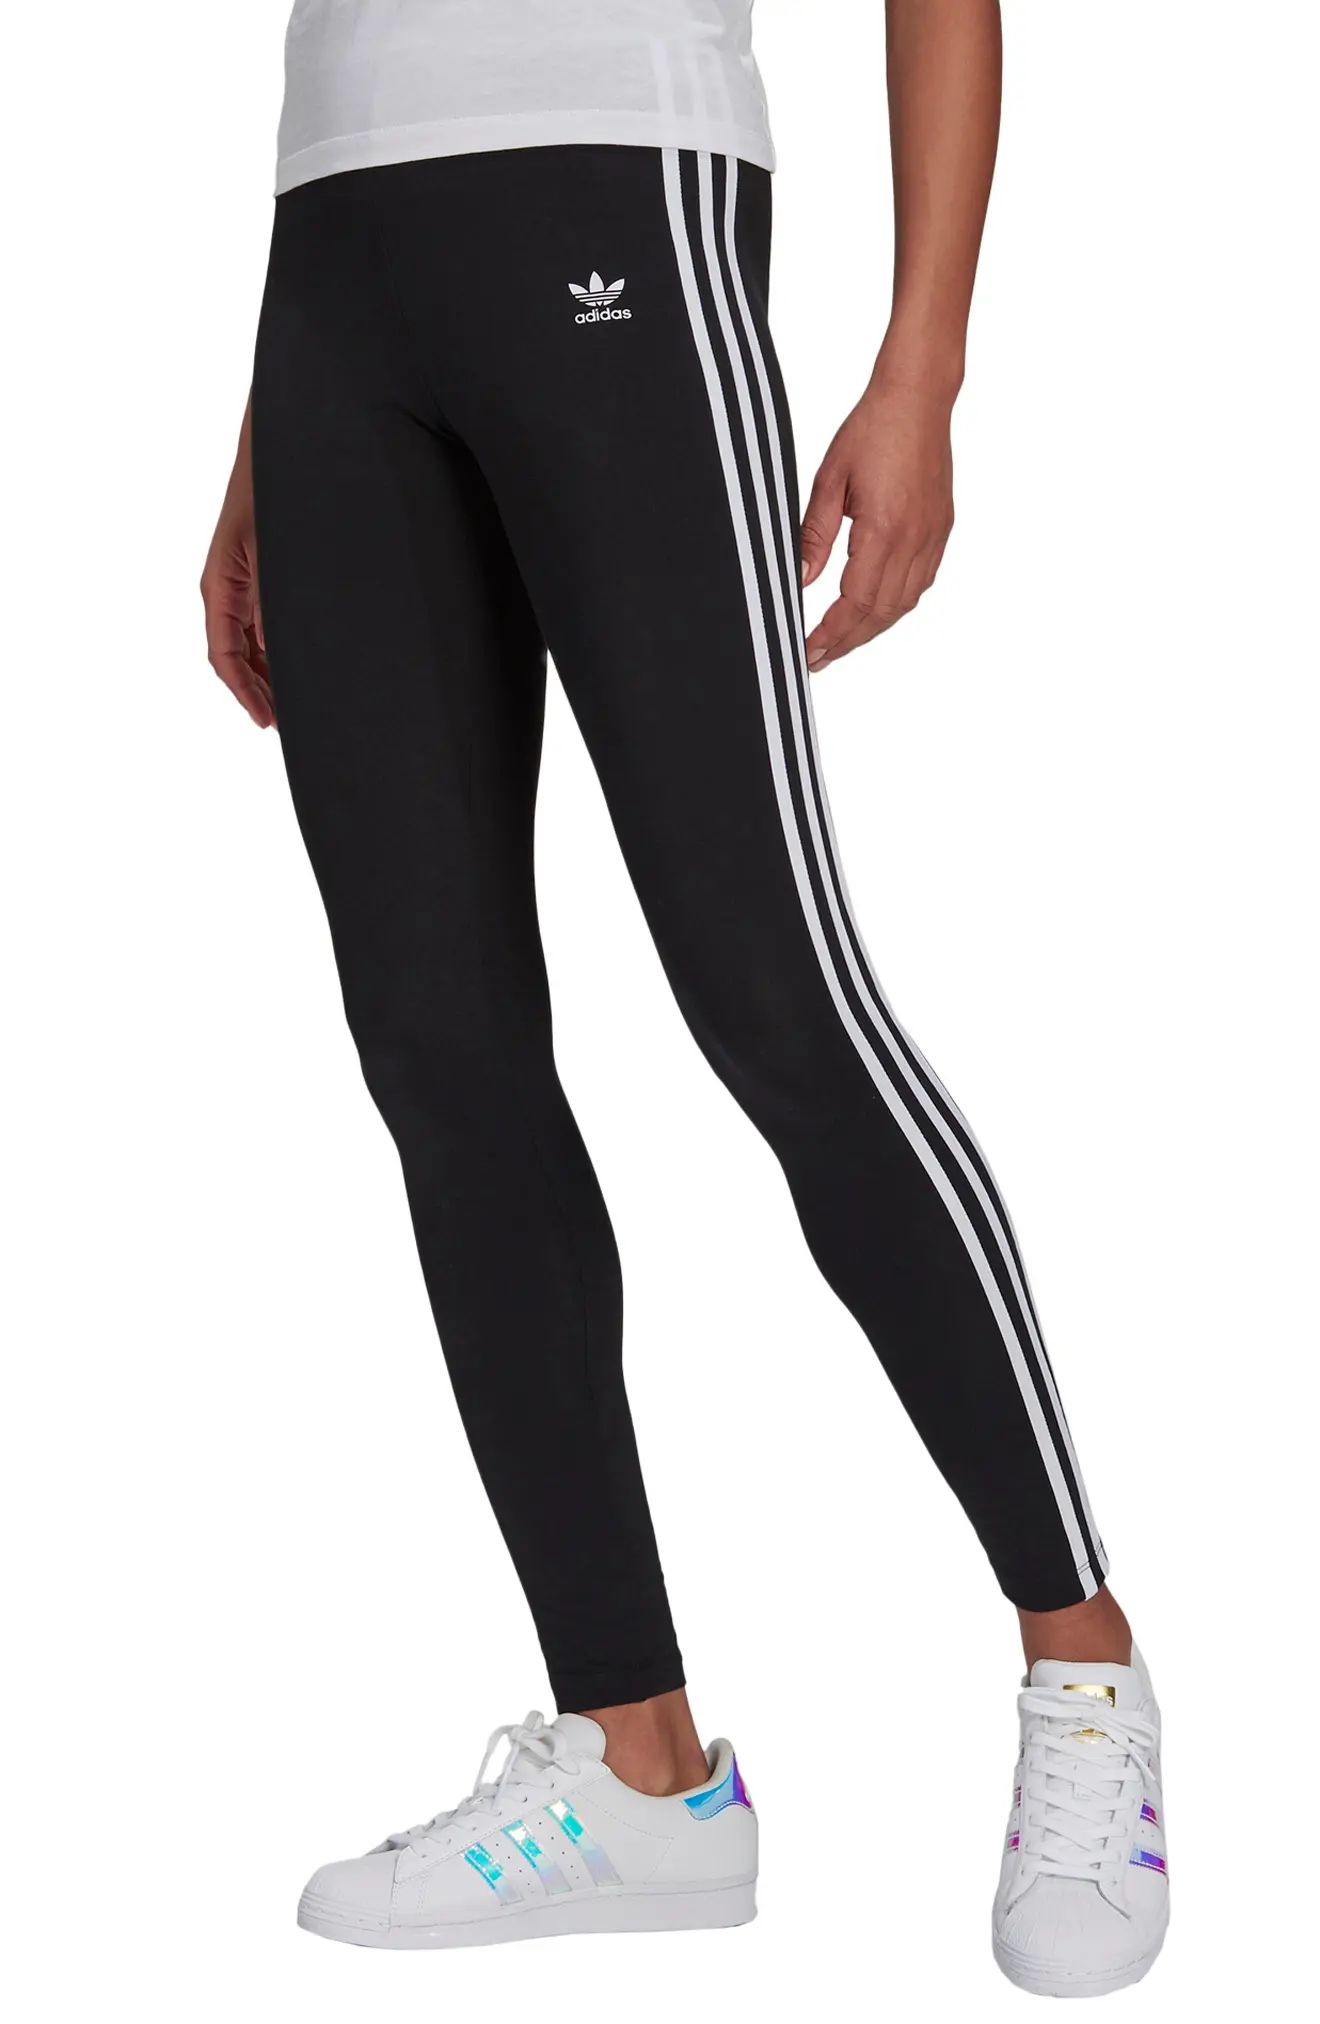 adidas Originals Classic 3-Stripes Tights in Black at Nordstrom, Size Small | Nordstrom